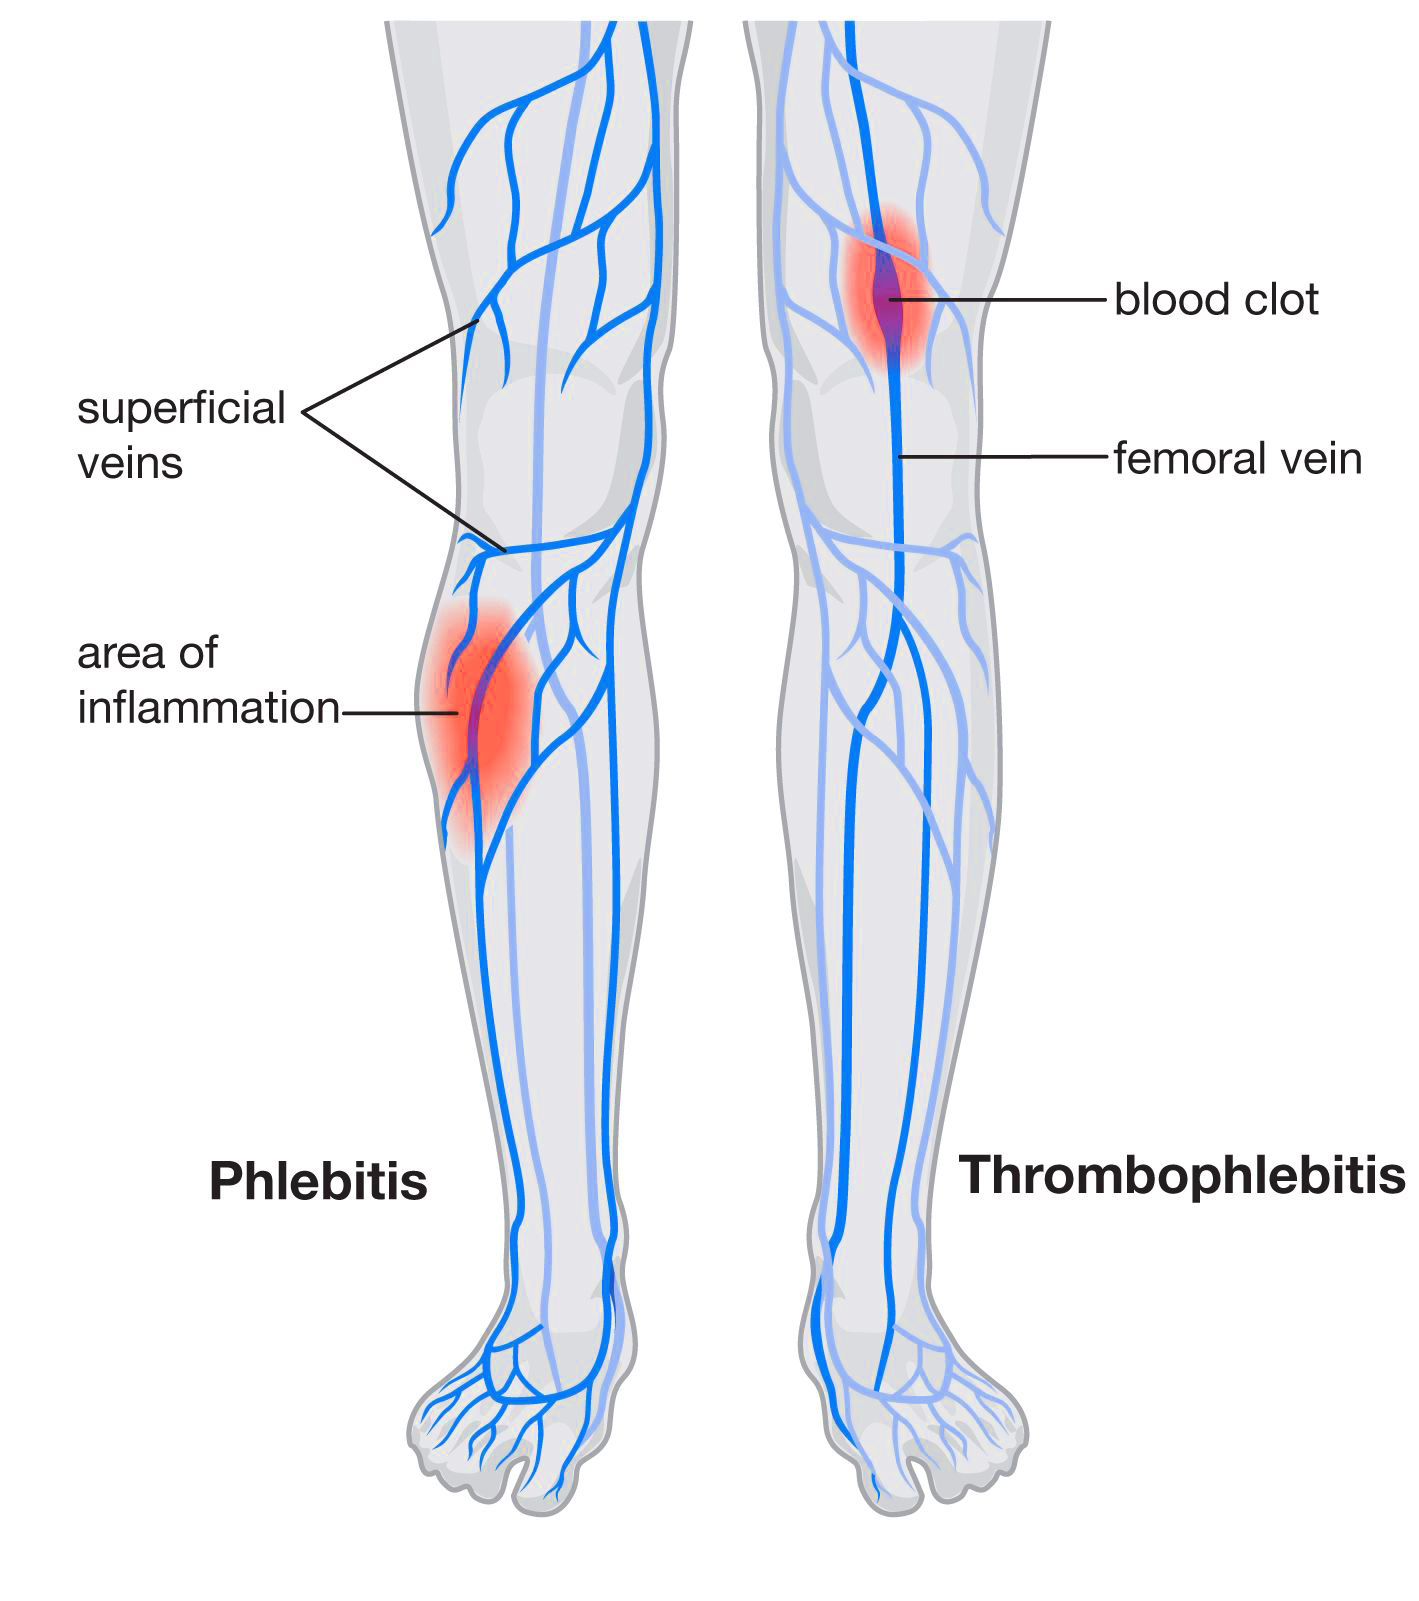 Superficial thrombophlebitis can pose grave health risks